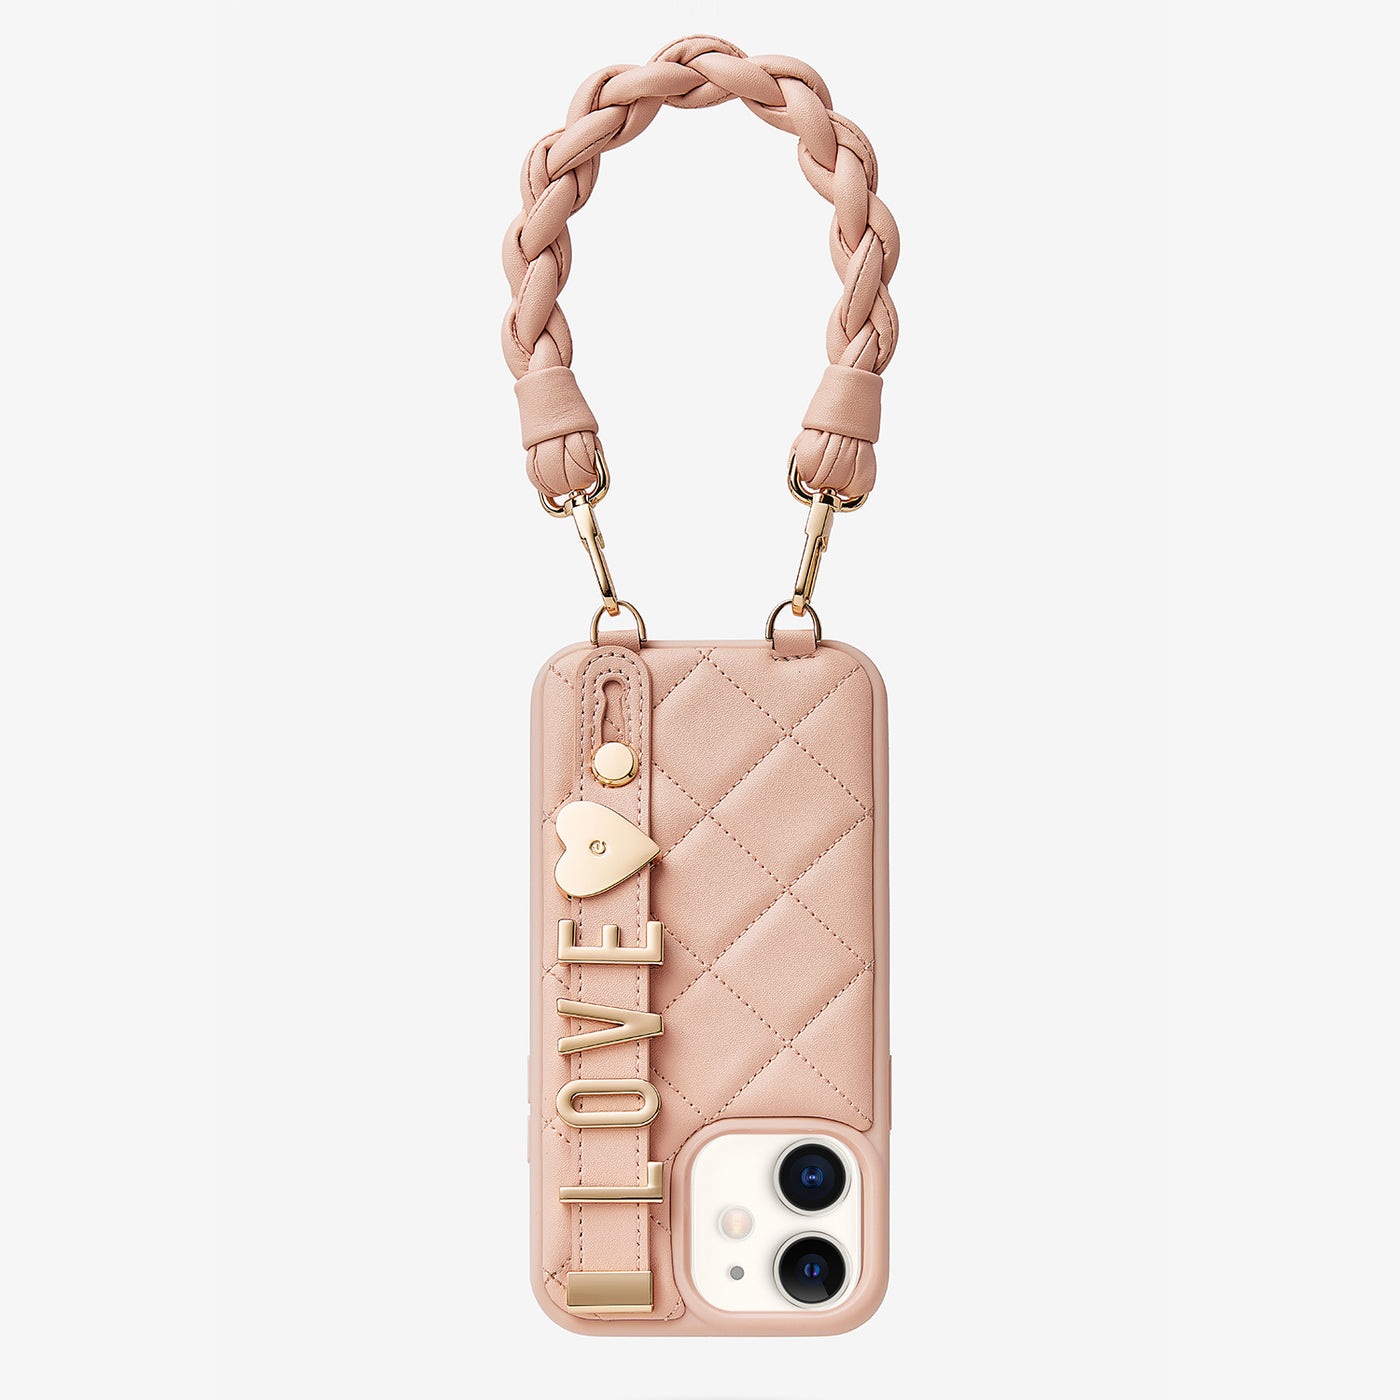 BraidTrend- Personalized Phone Case with Wristband